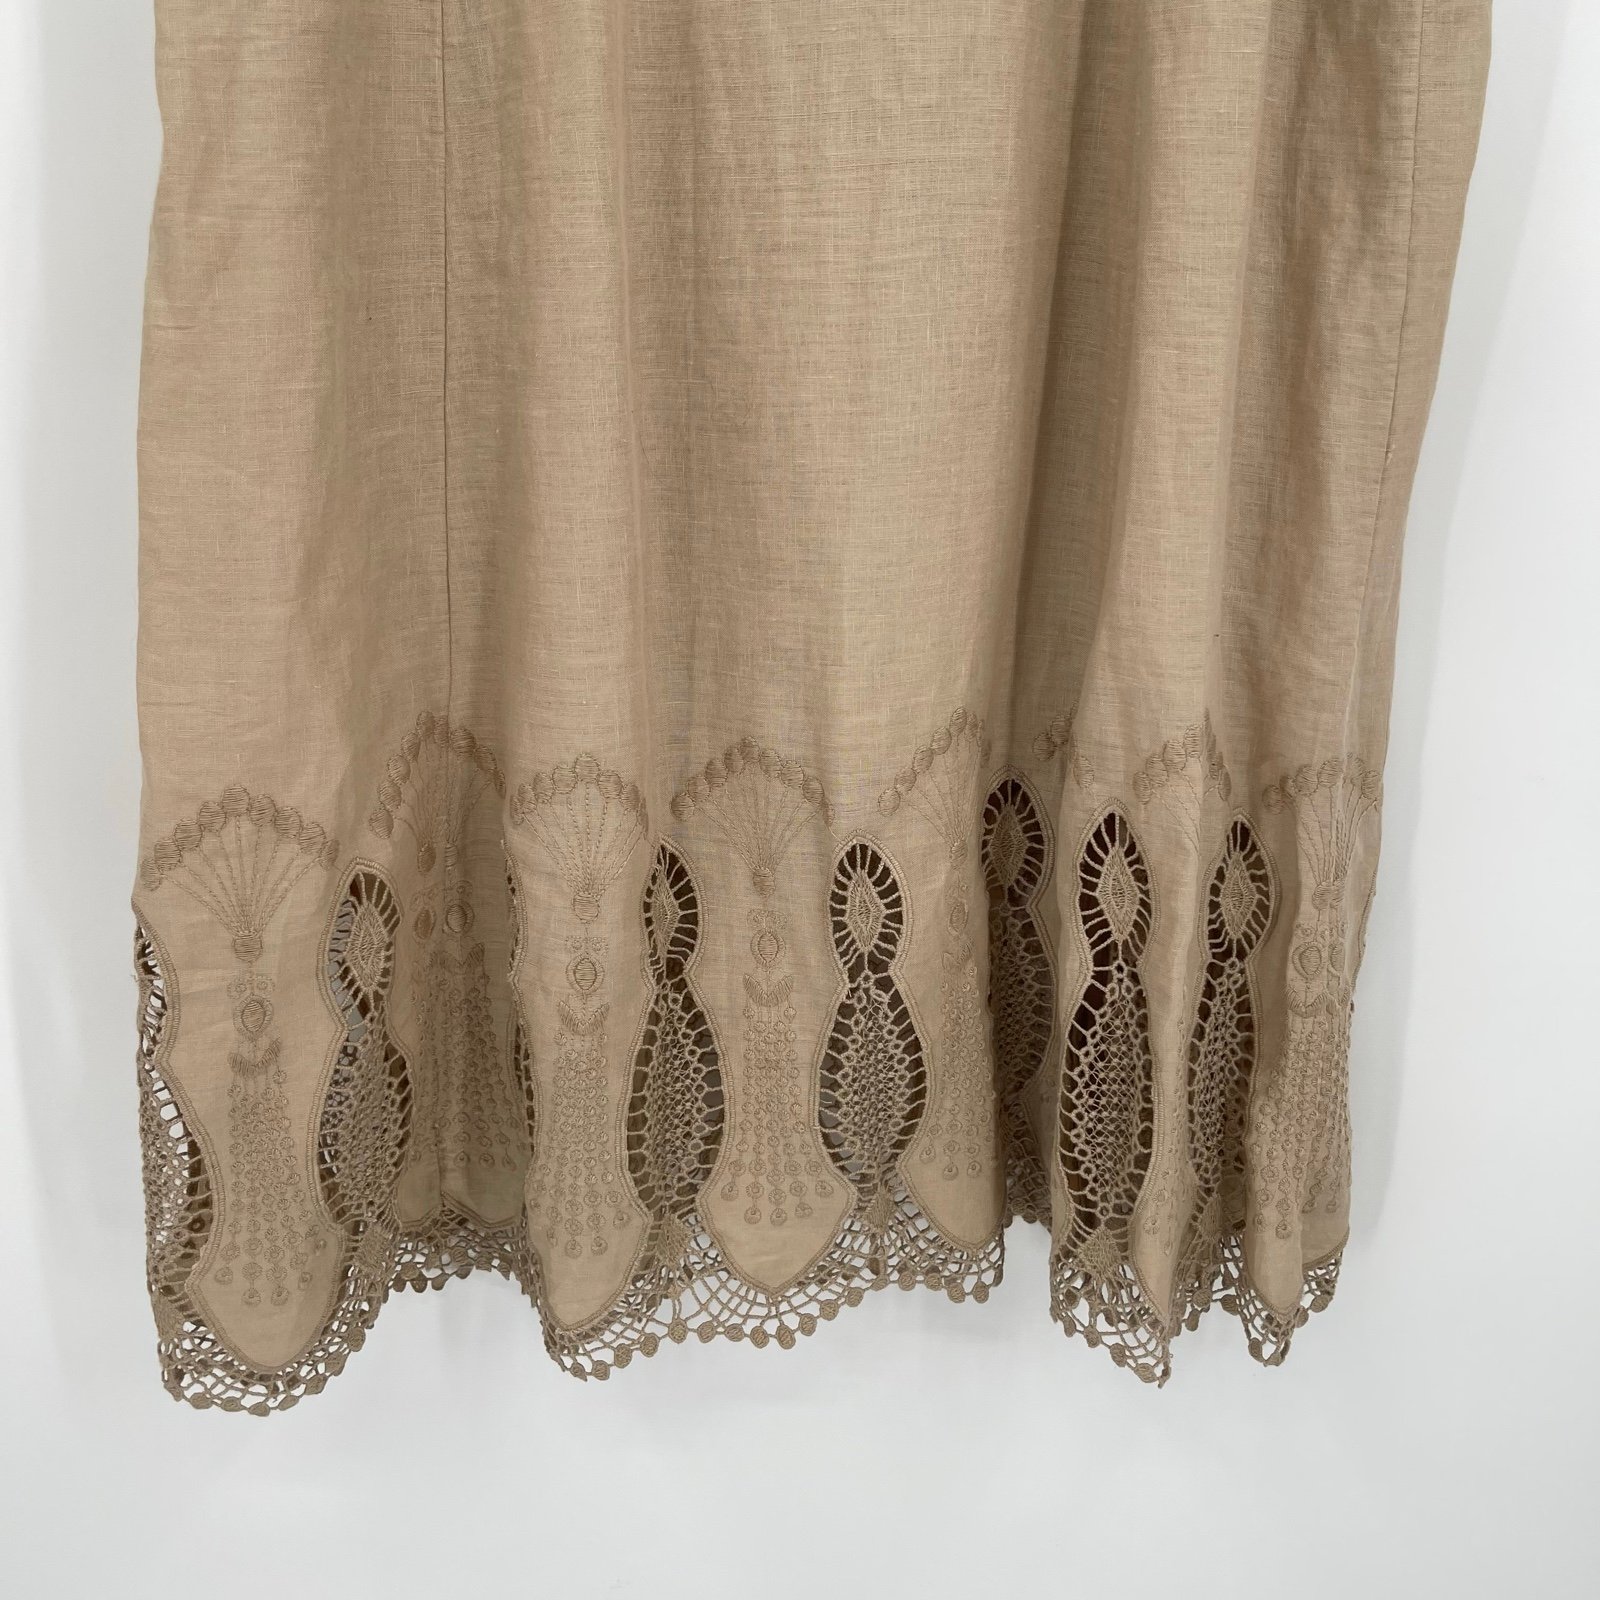 where to buy  Chico’s NWT Linen Crochet Lace Maxi Skirt Embroidered Hem Boho Size 2 (L) PmccjoobS Store Online